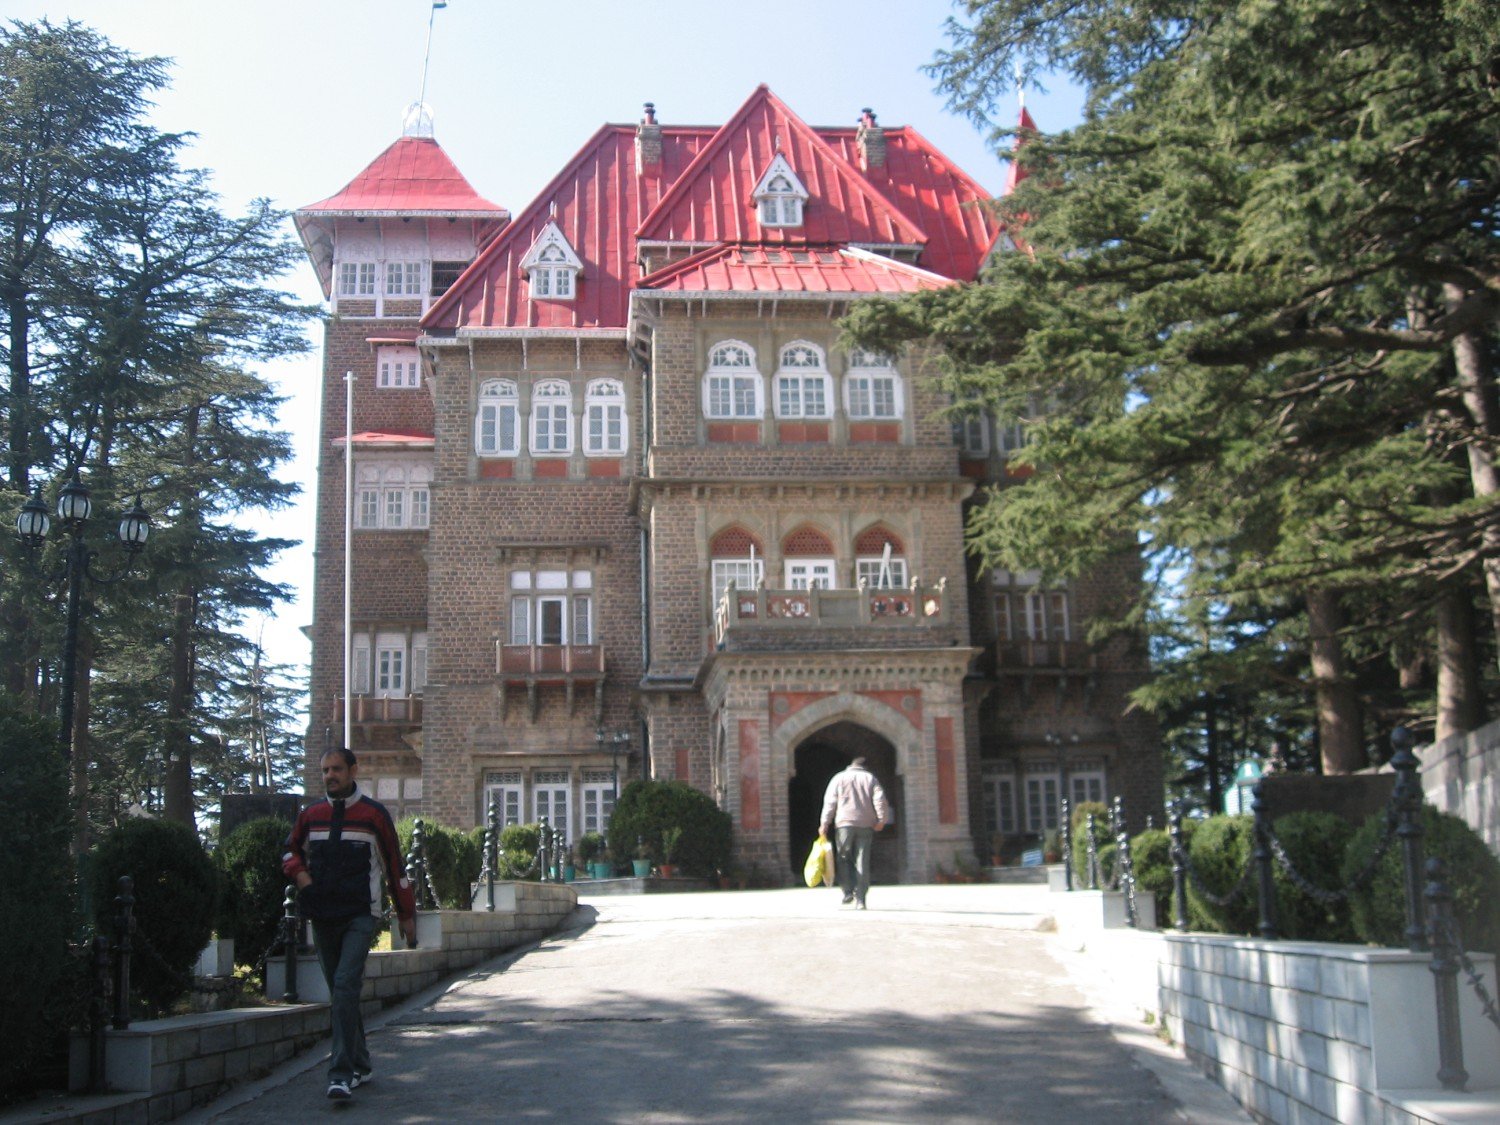 Gorton Castle in Shimla is the office of Accountant General